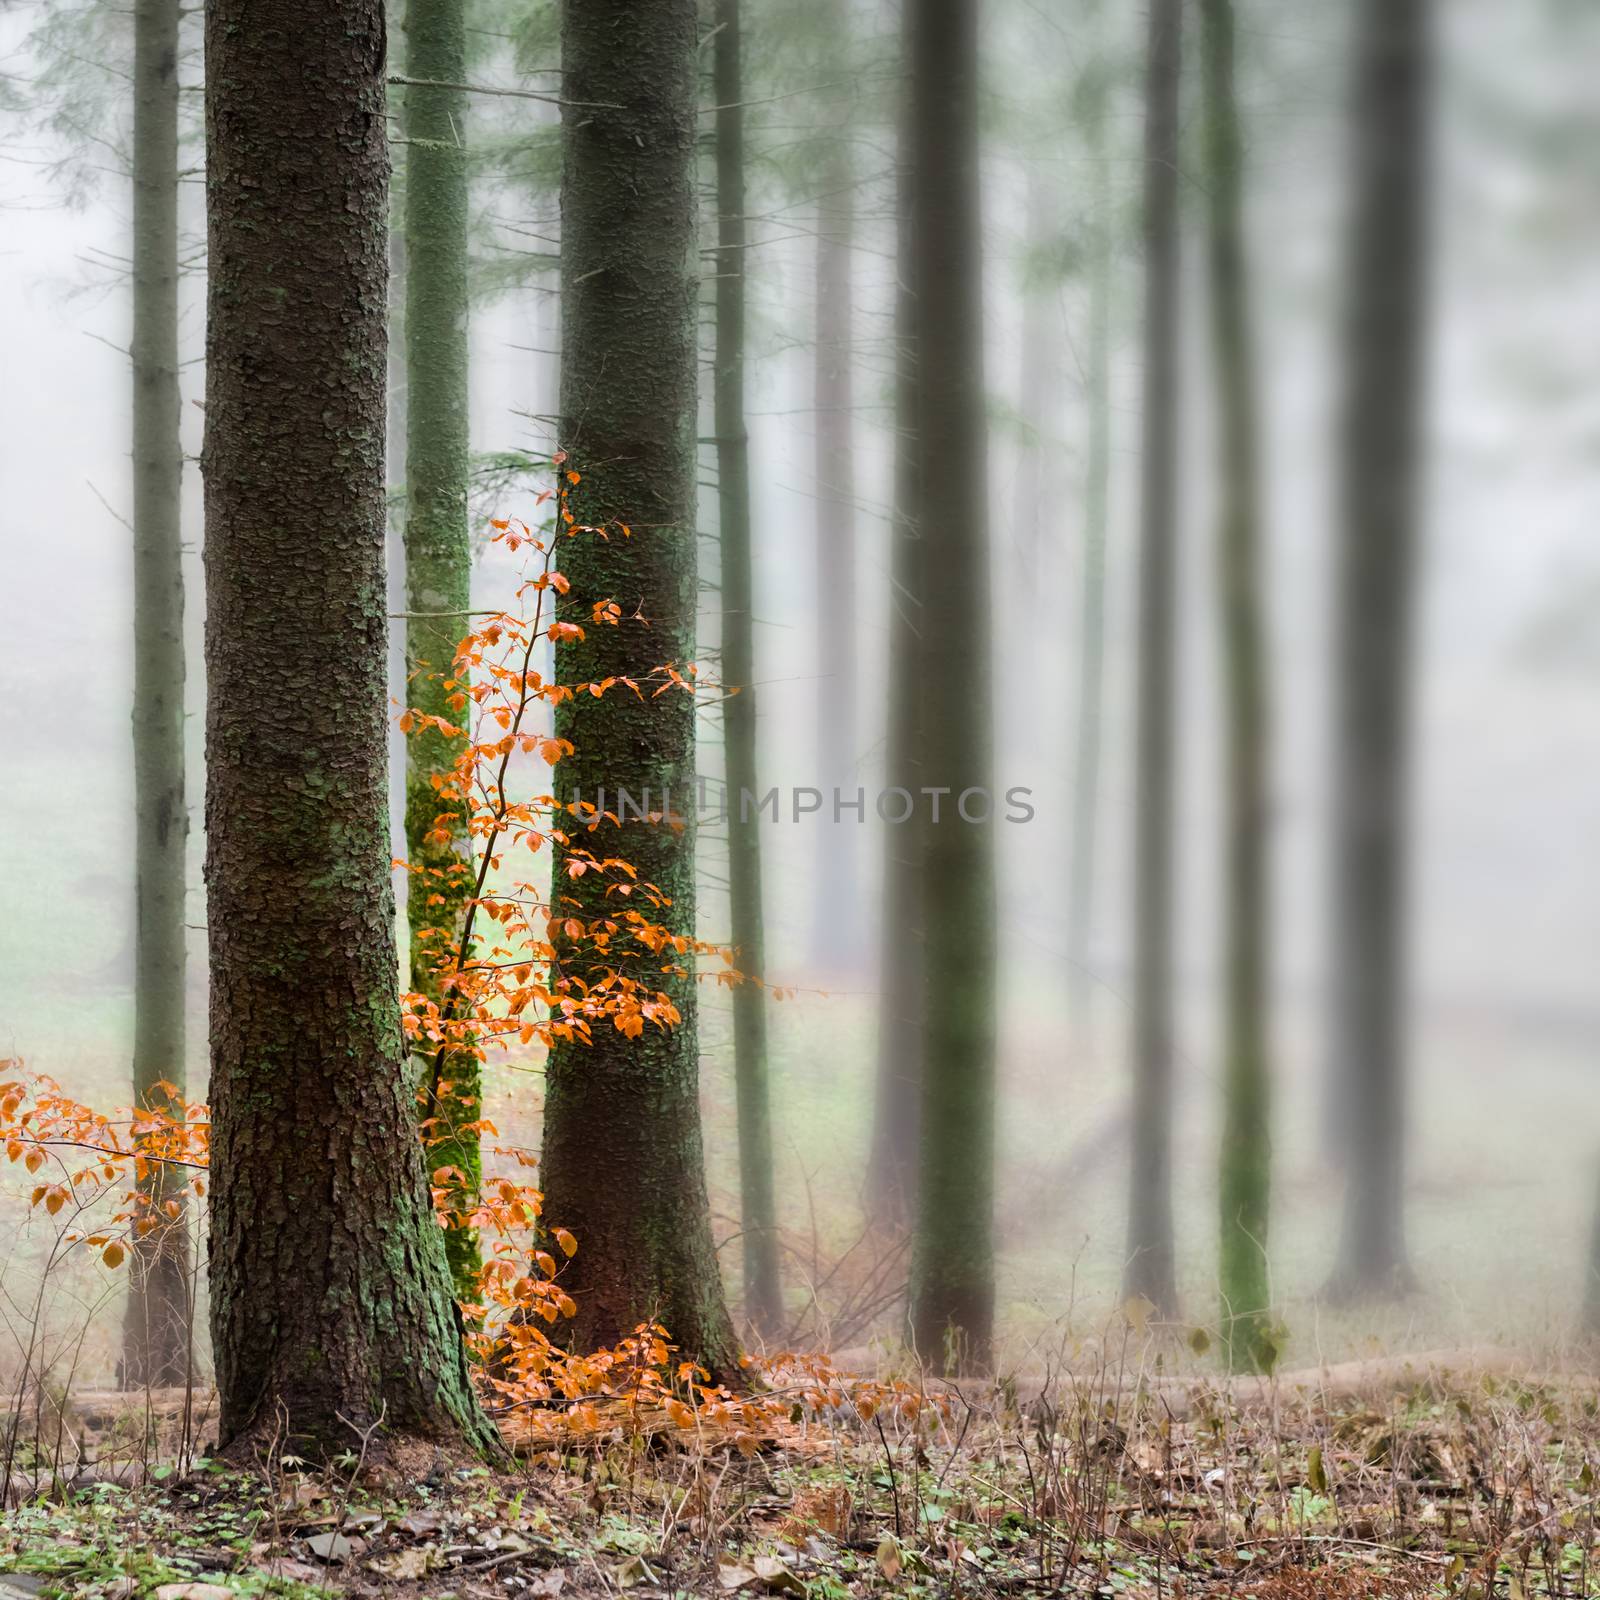 Mysterious fog in the green forest with pine trees. Orange leaves in a front.